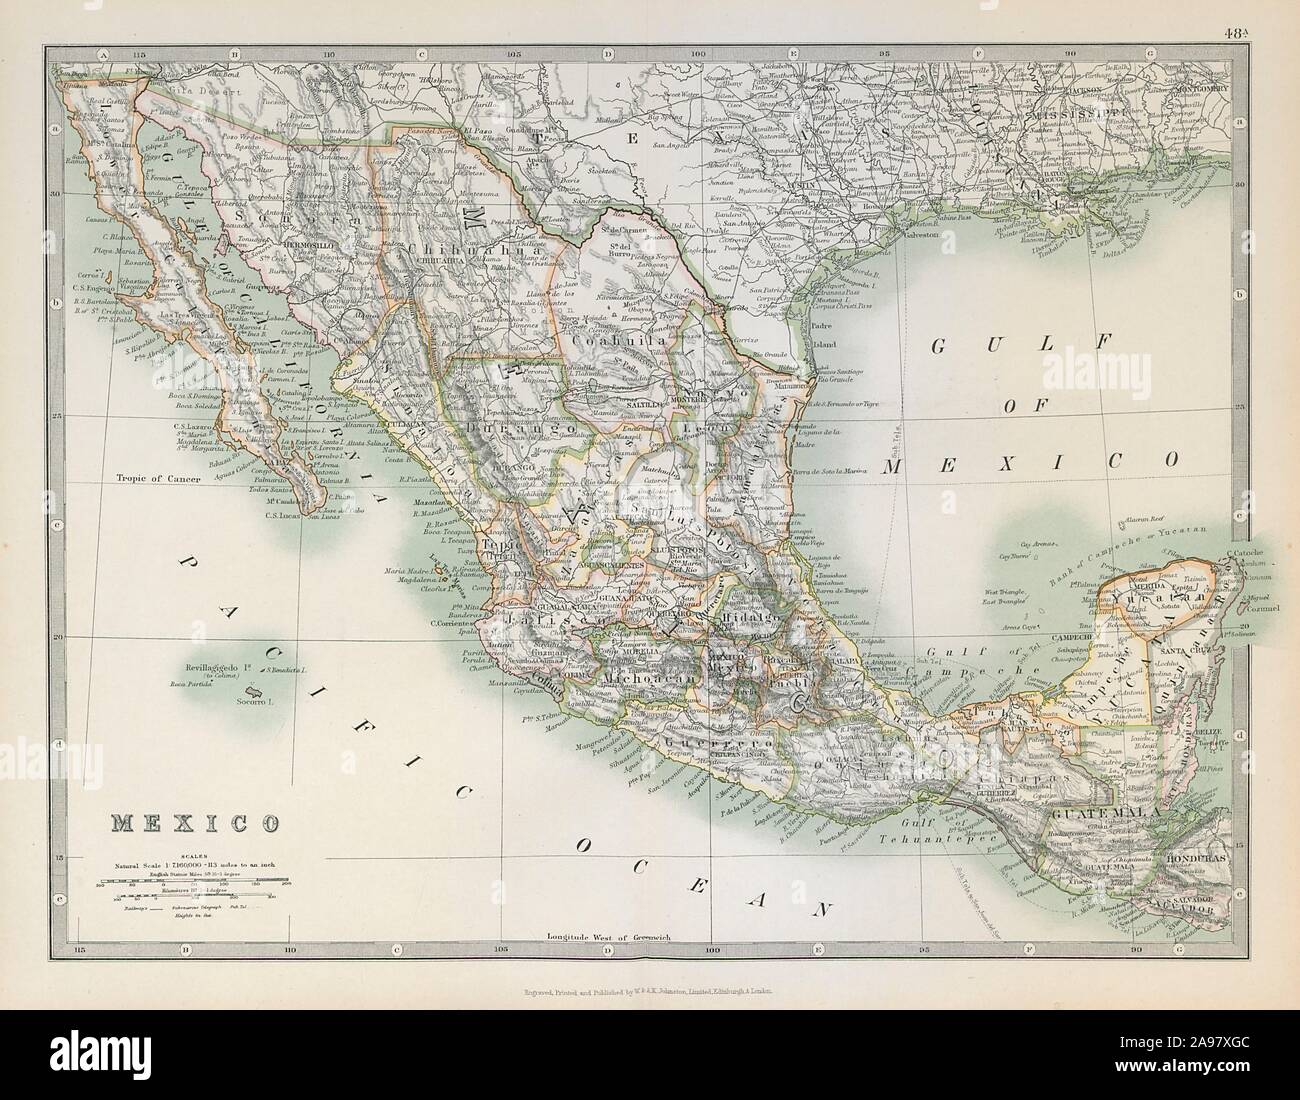 Showing railroads roads steamship routes & battlefields 1903 old map MEXICO 